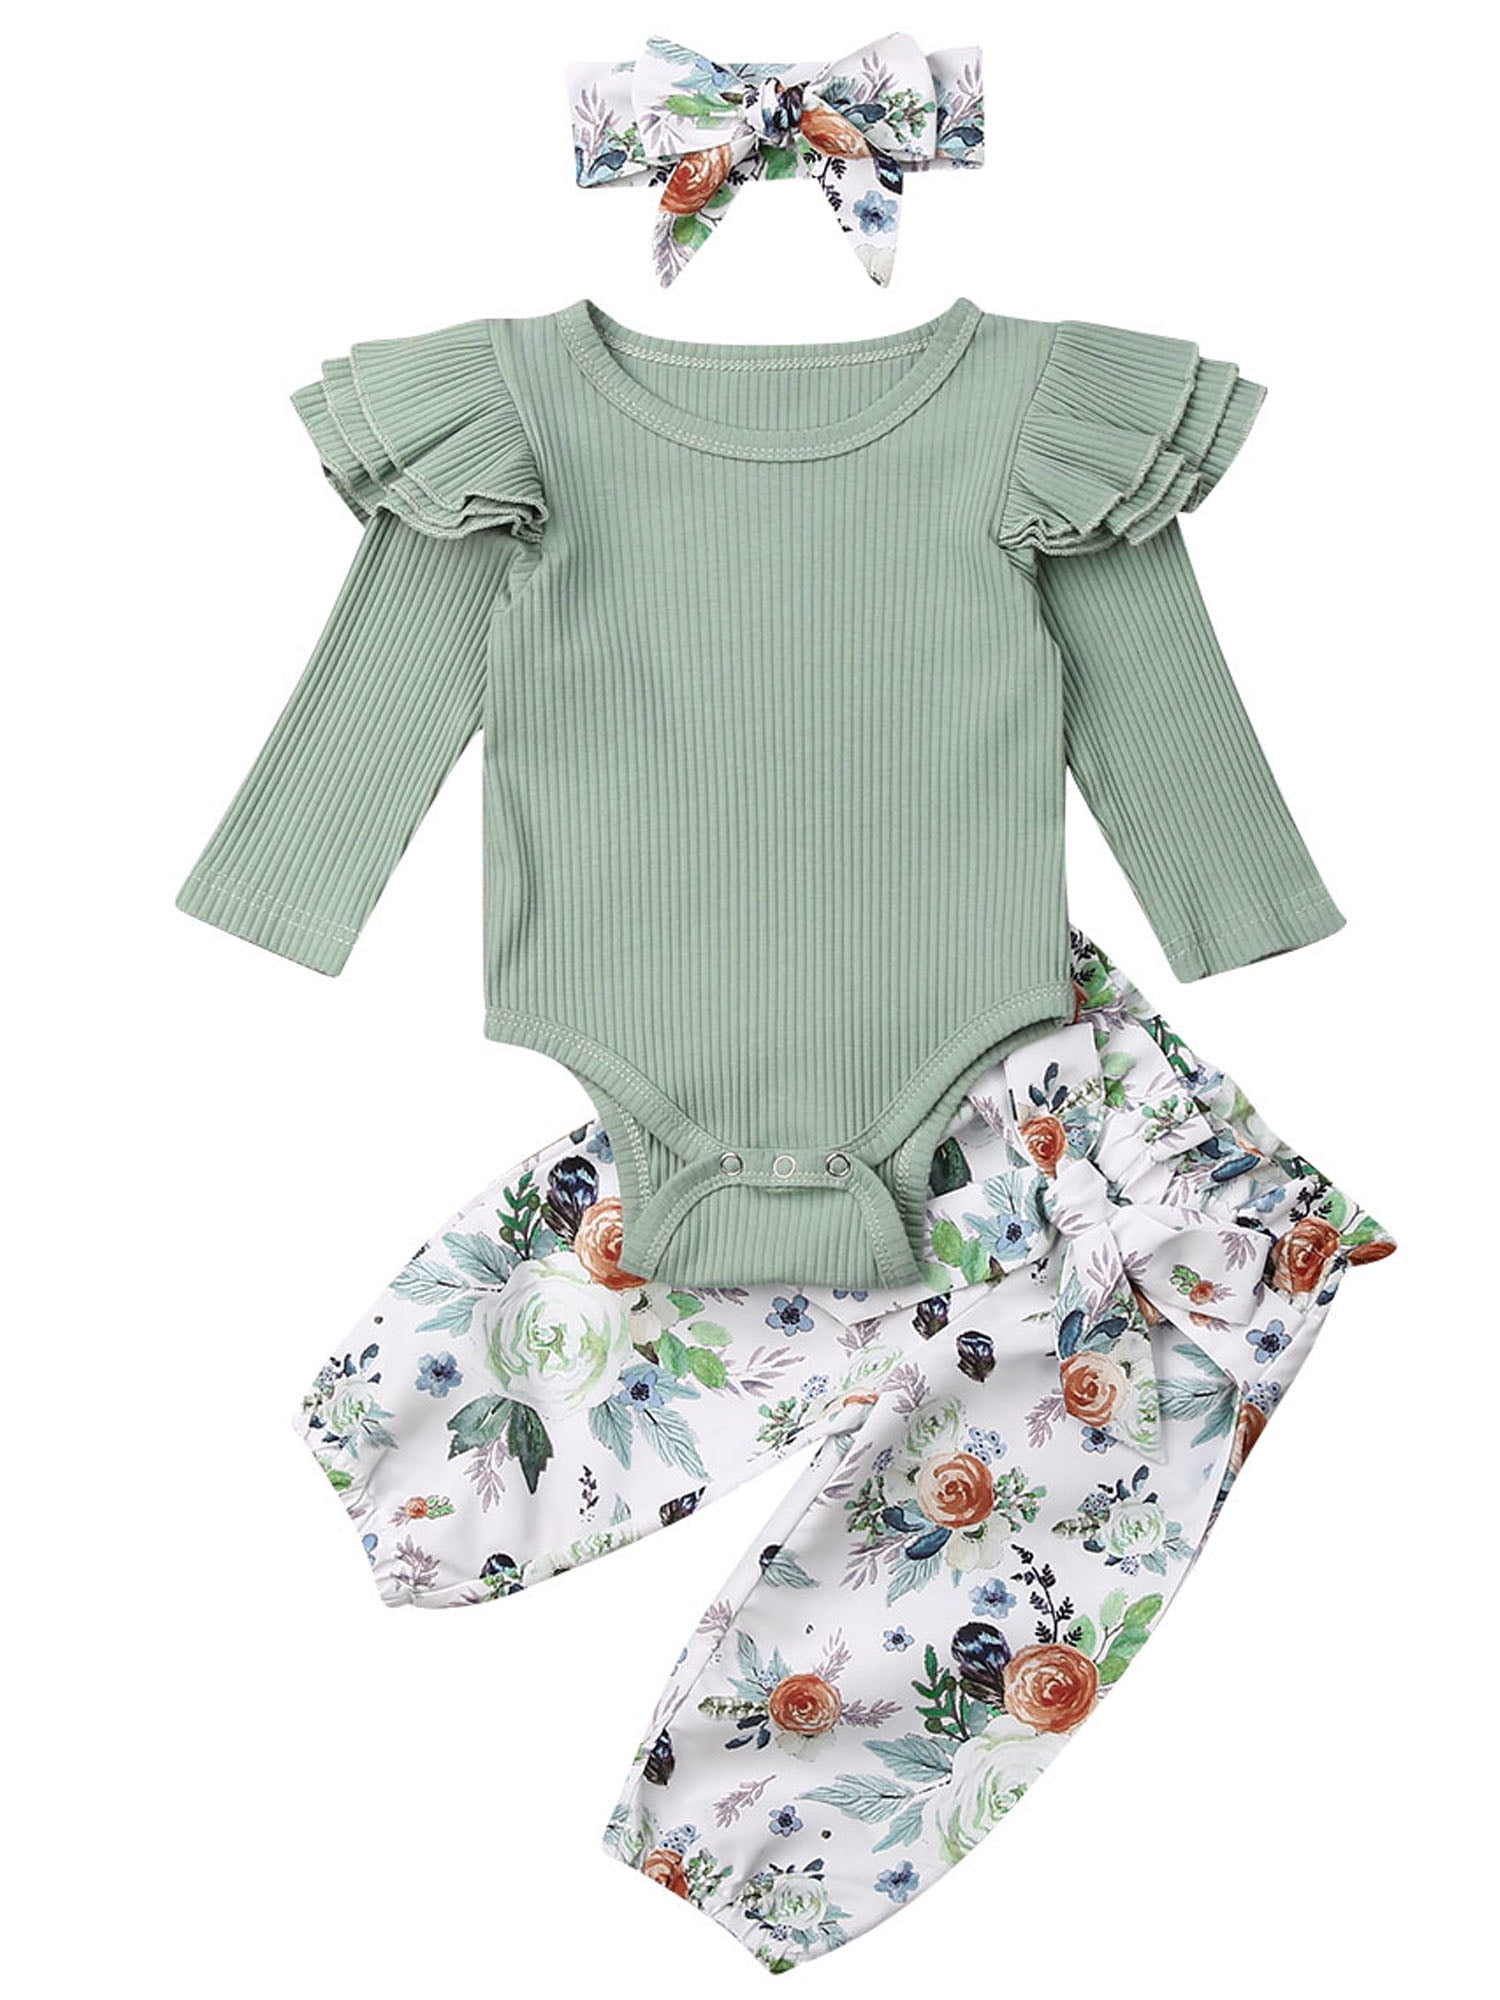 Newborn Infant Baby Girls Tops Romper Floral Pants Outfits Set Clothes ...